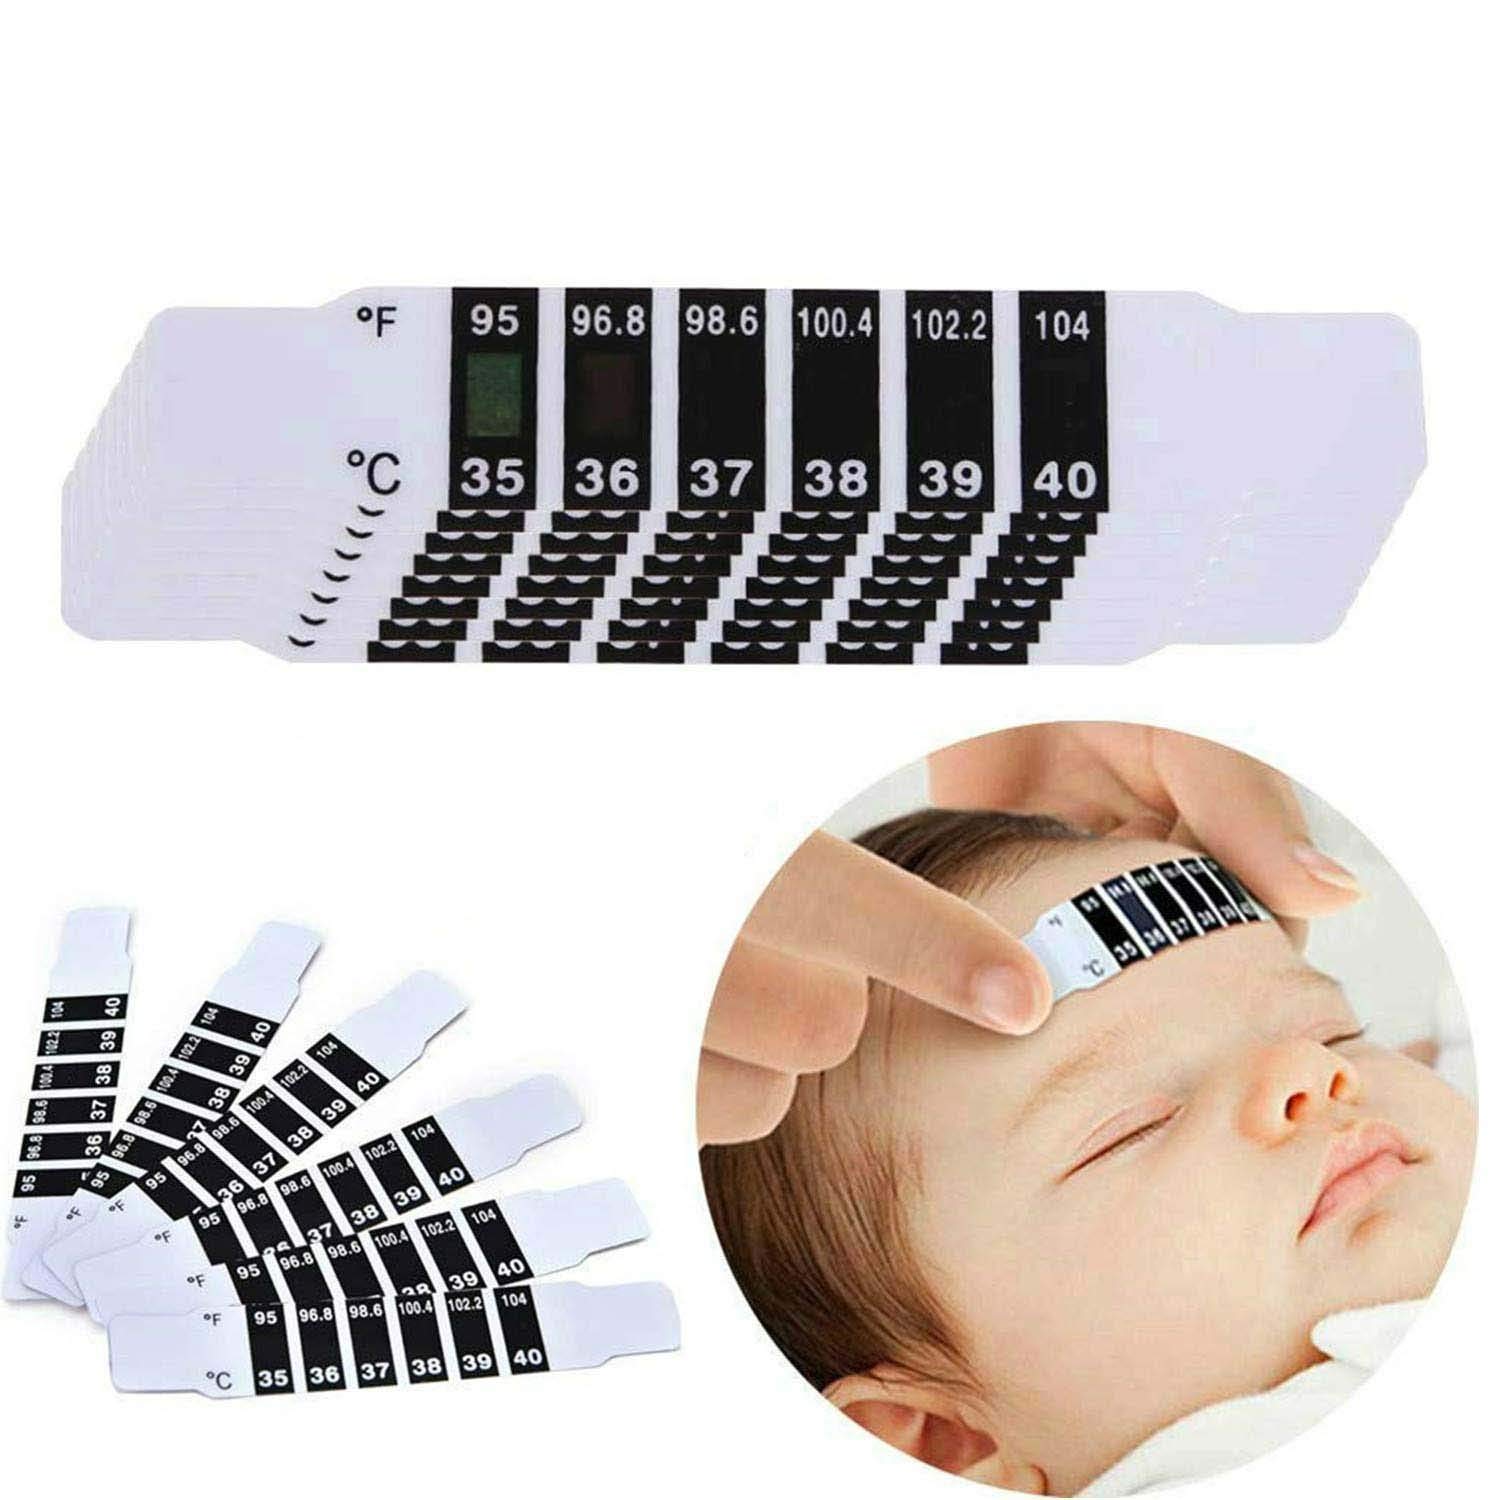 Forehead thermometer strips